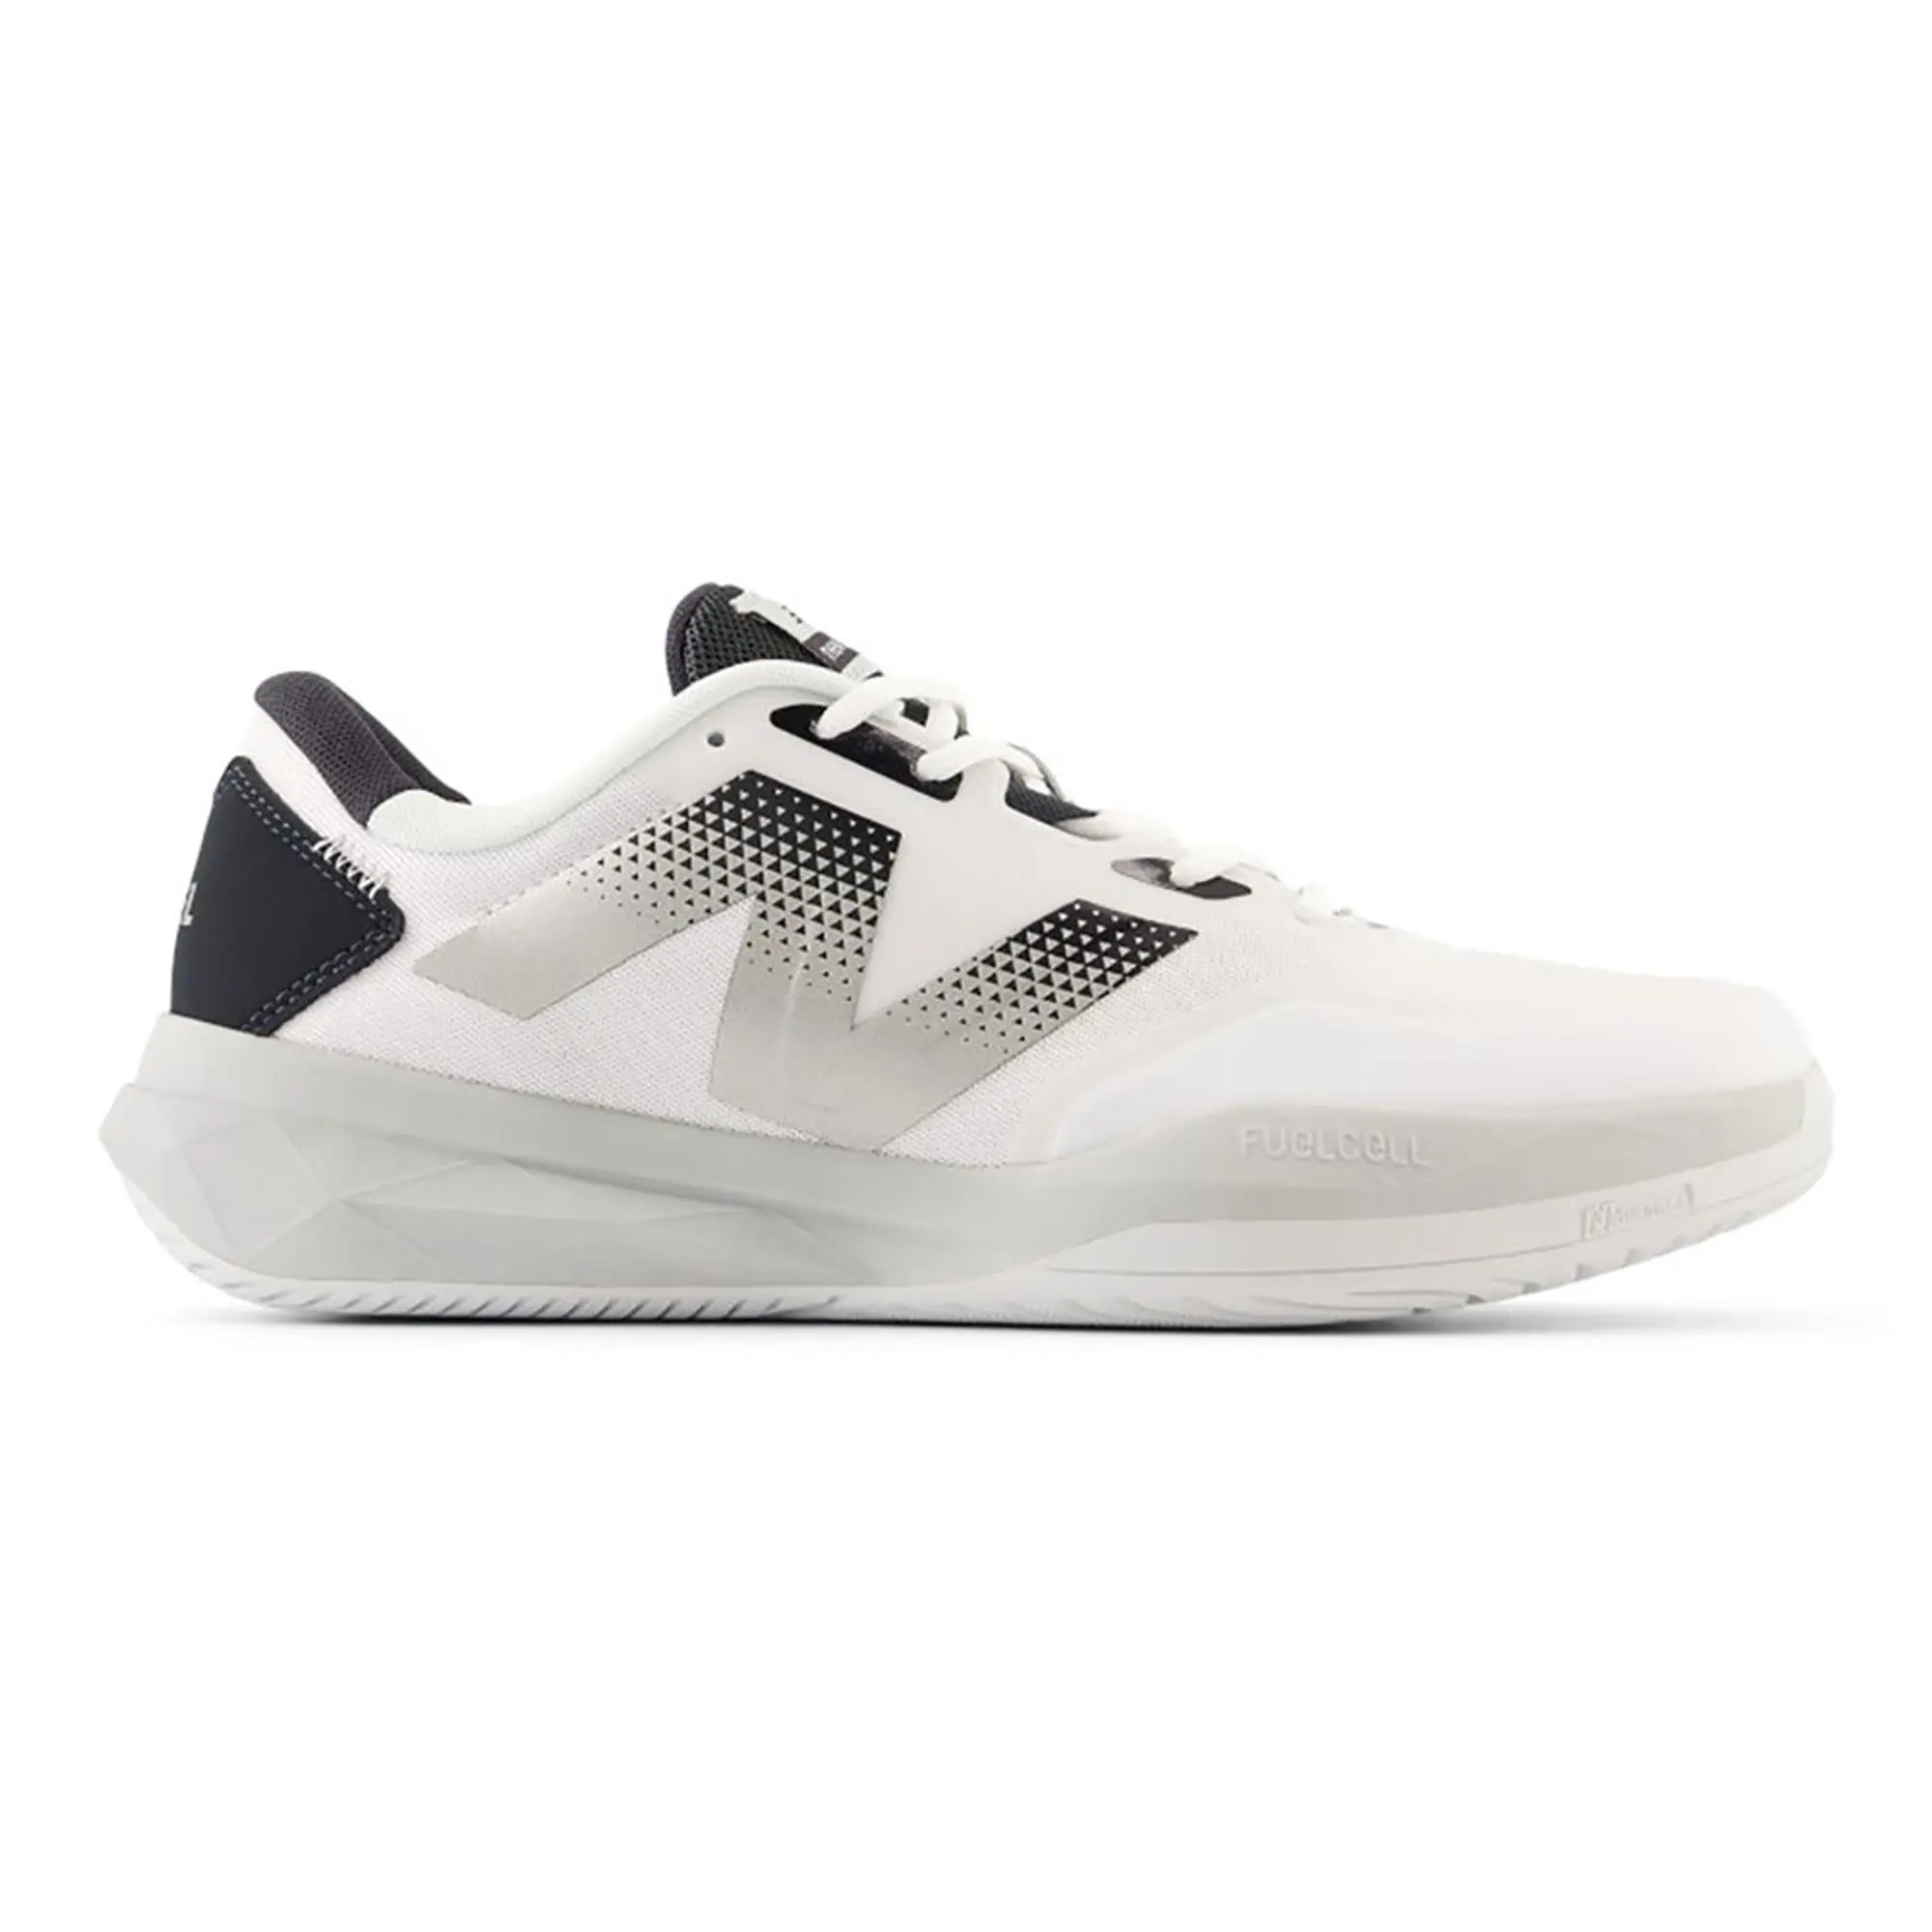 New Balance Fuelcell 796v4 Padel Shoes  - White